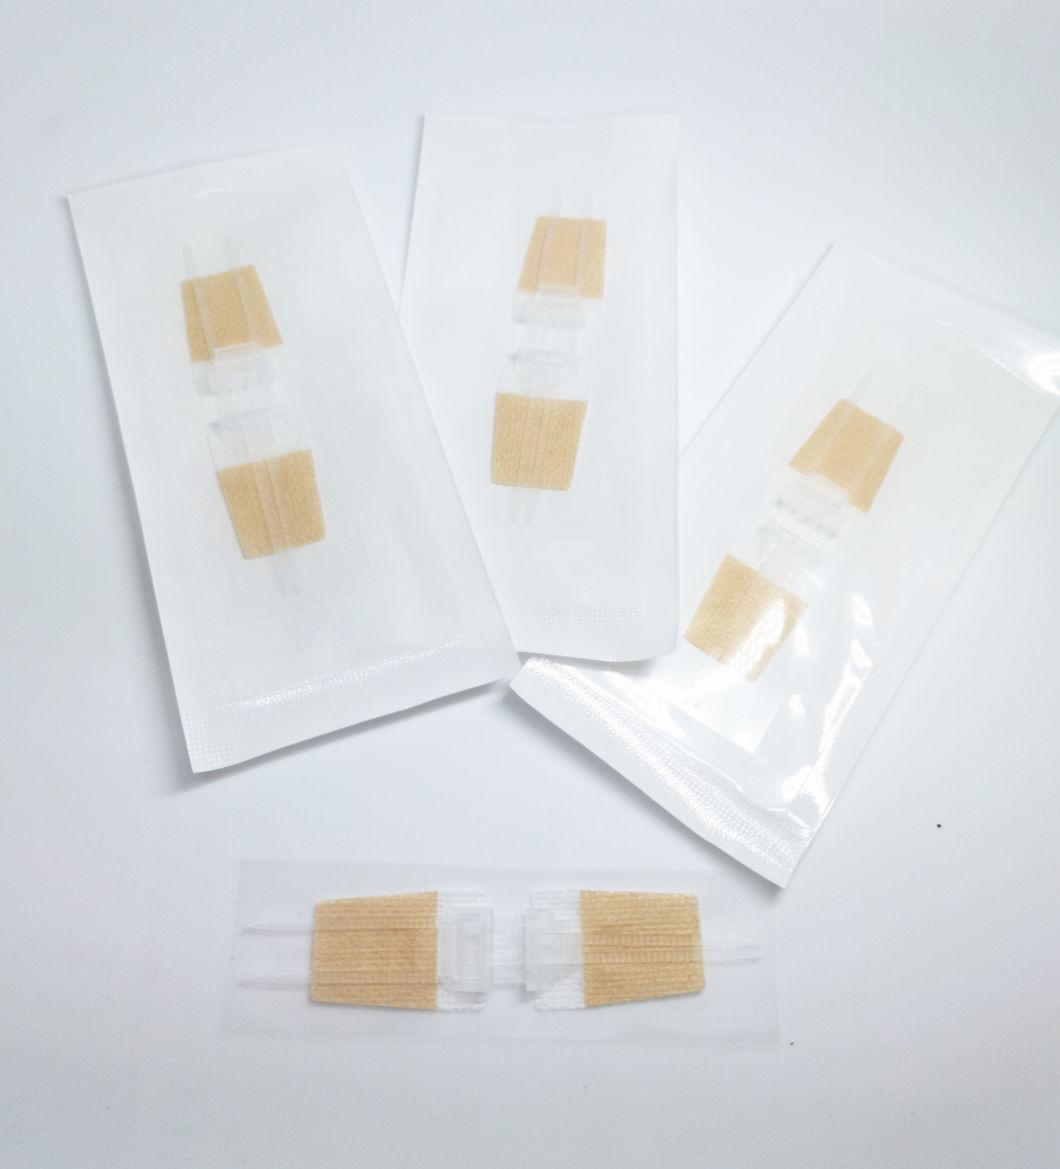 Medical Wound Closure Device Plaster, Adhesive Wound Closure Device